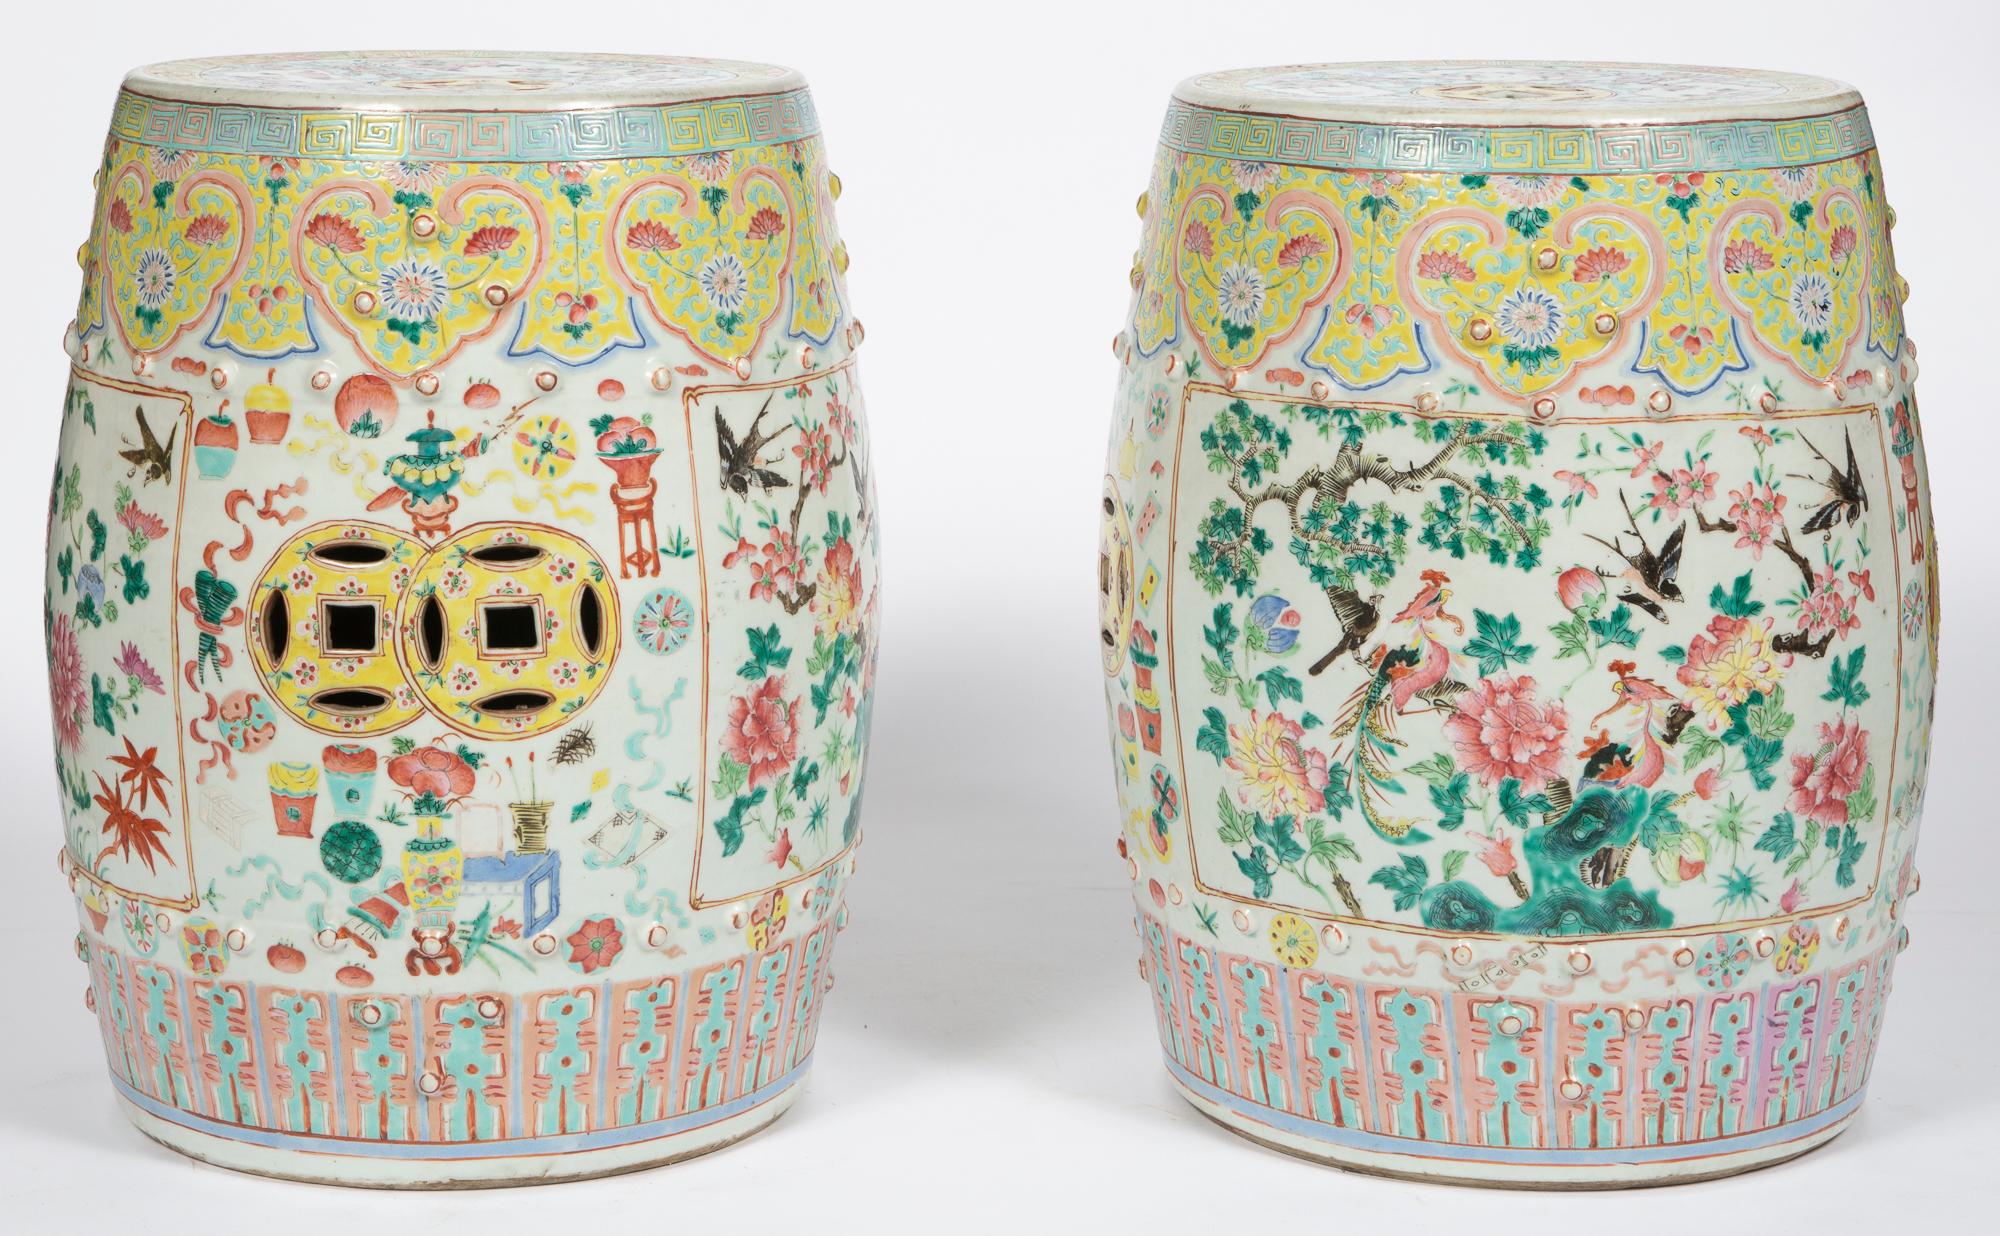 Chinese Export porcelain garden seats,
Mid-19th century.
(Ref: 9576-Mrmr)

The Chinese porcelain garden seats are of circular barrel form with bands of yellow around the upper rim and the top. Around the top of the seat is a band of Greek Key